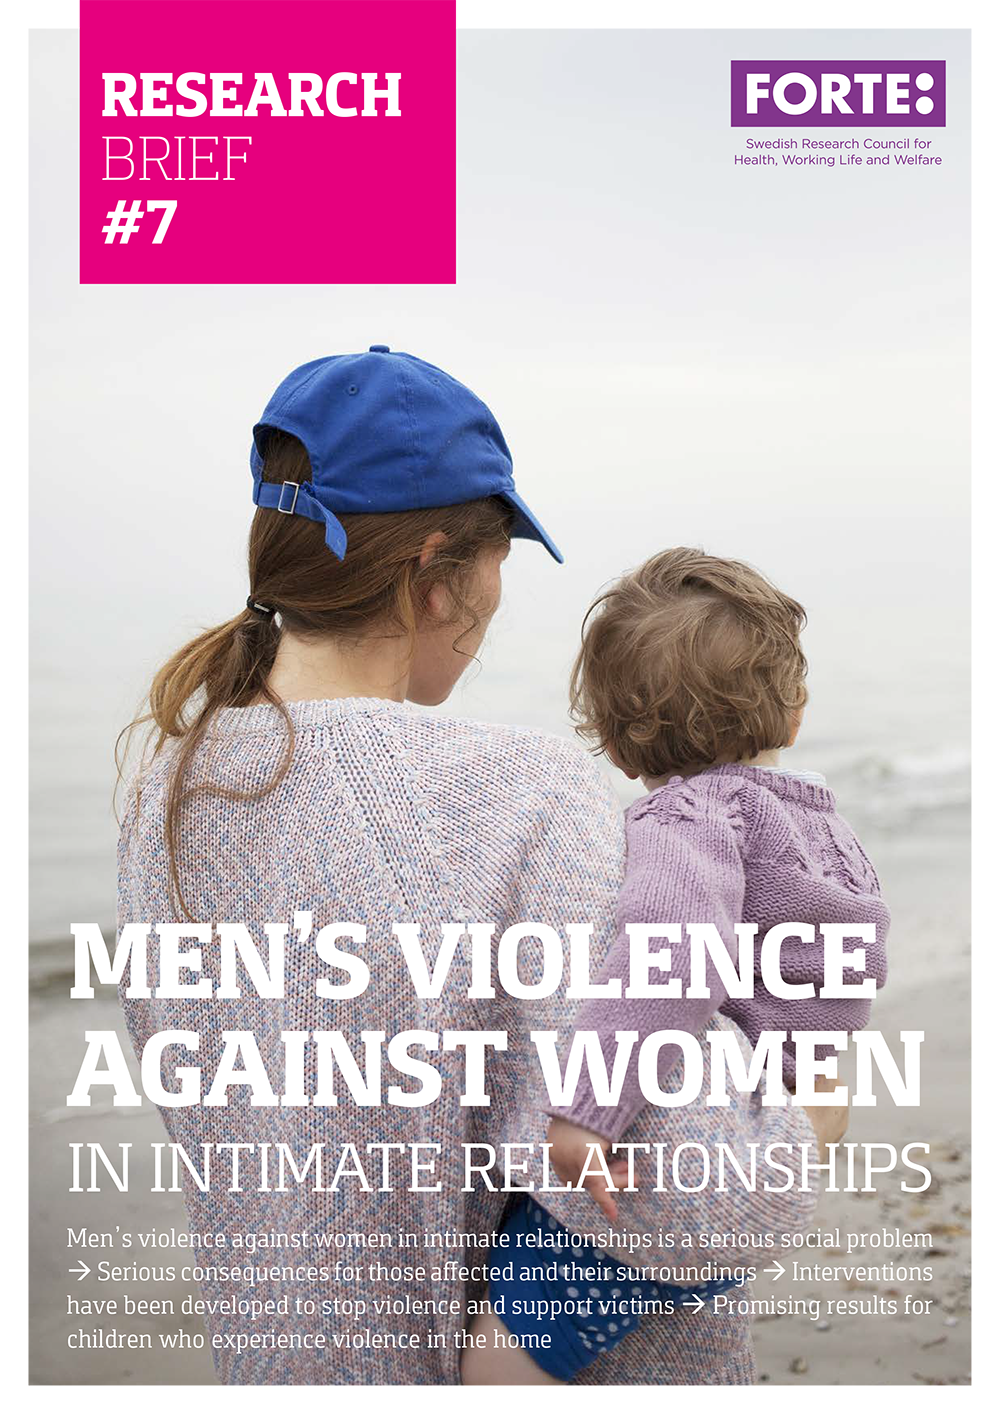 Research brief: Men's violence against women in intimate relationships